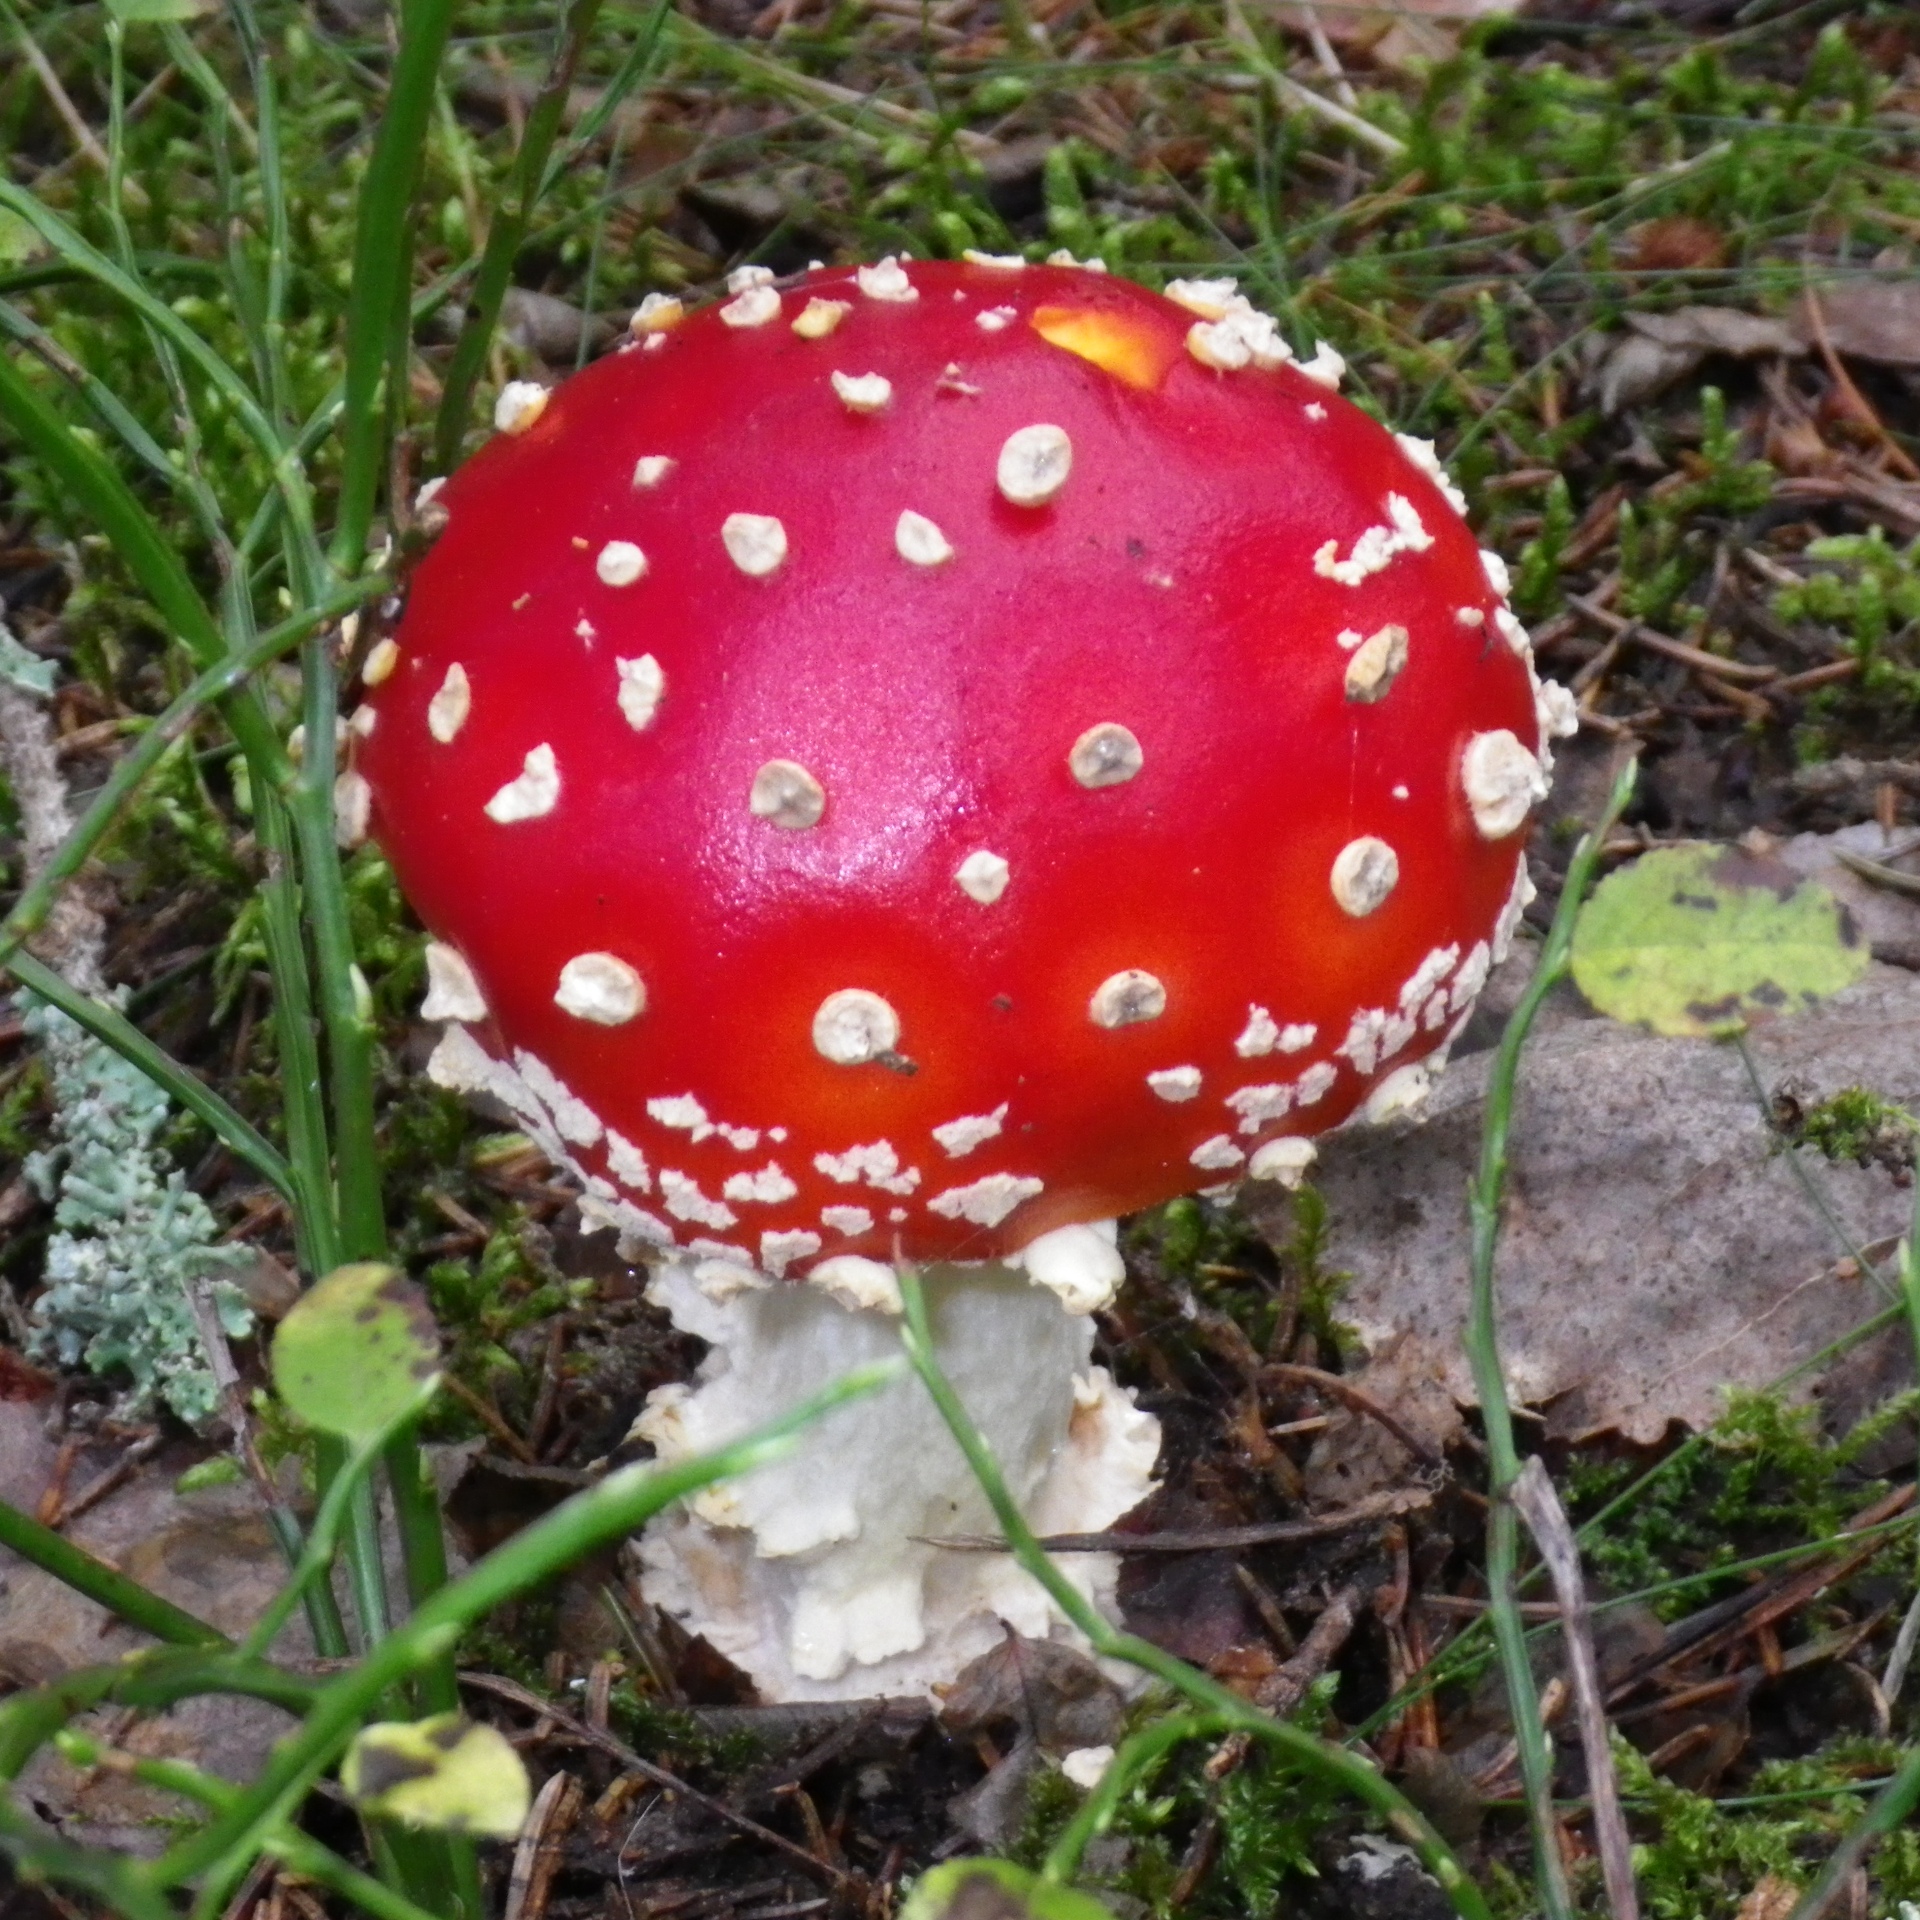 red mushroom growing in grass on the ground